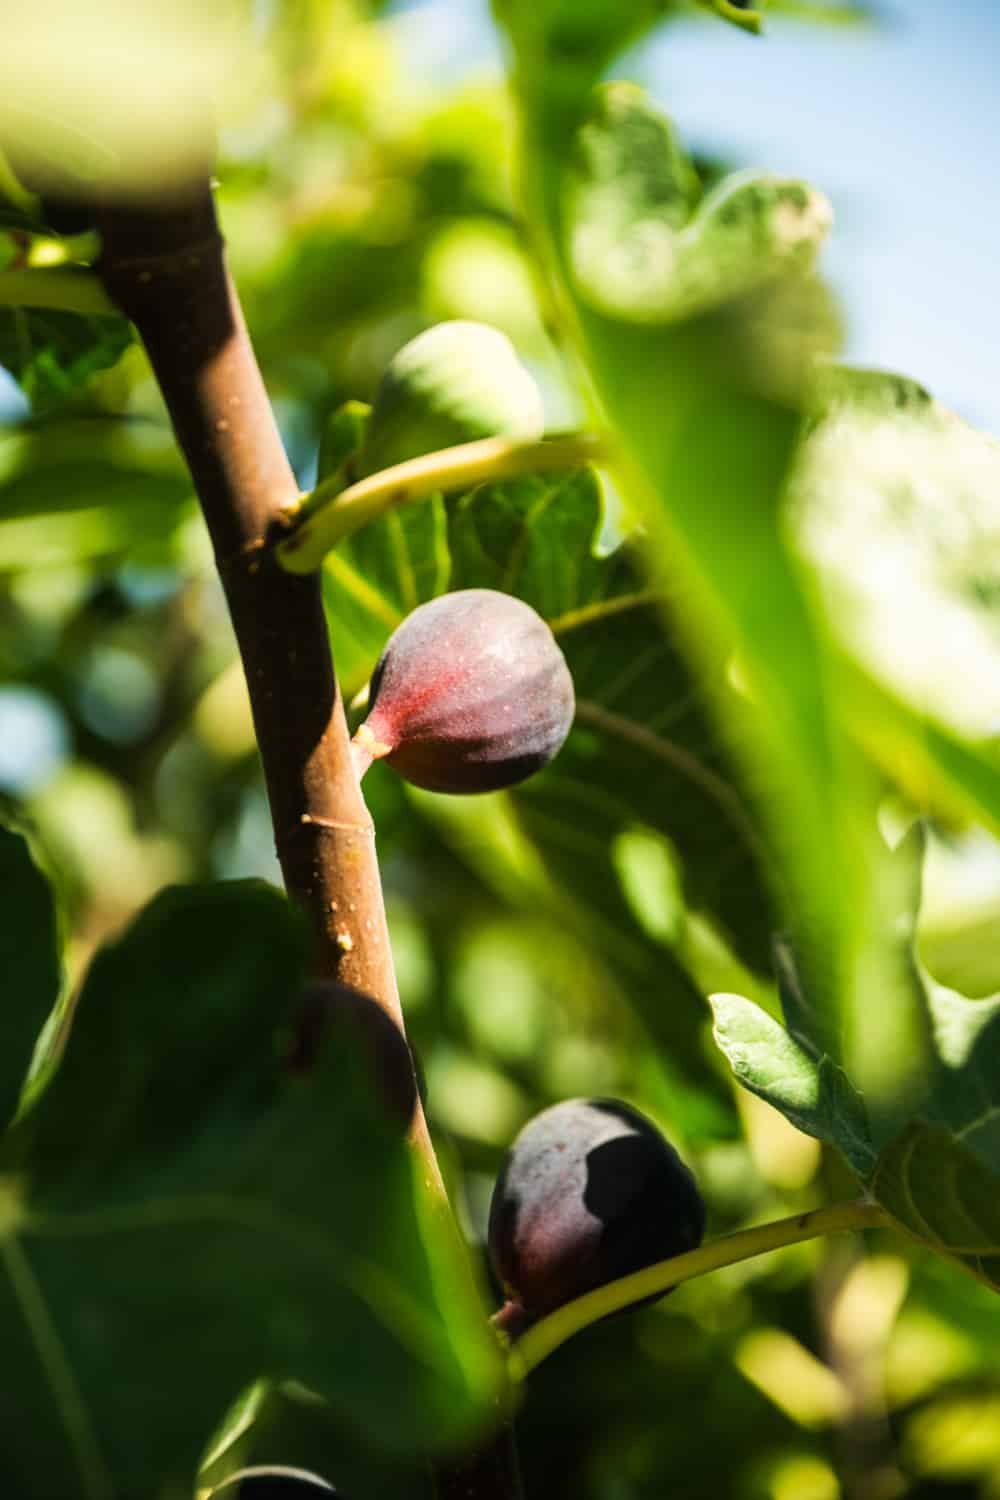 Figs growing on the tree